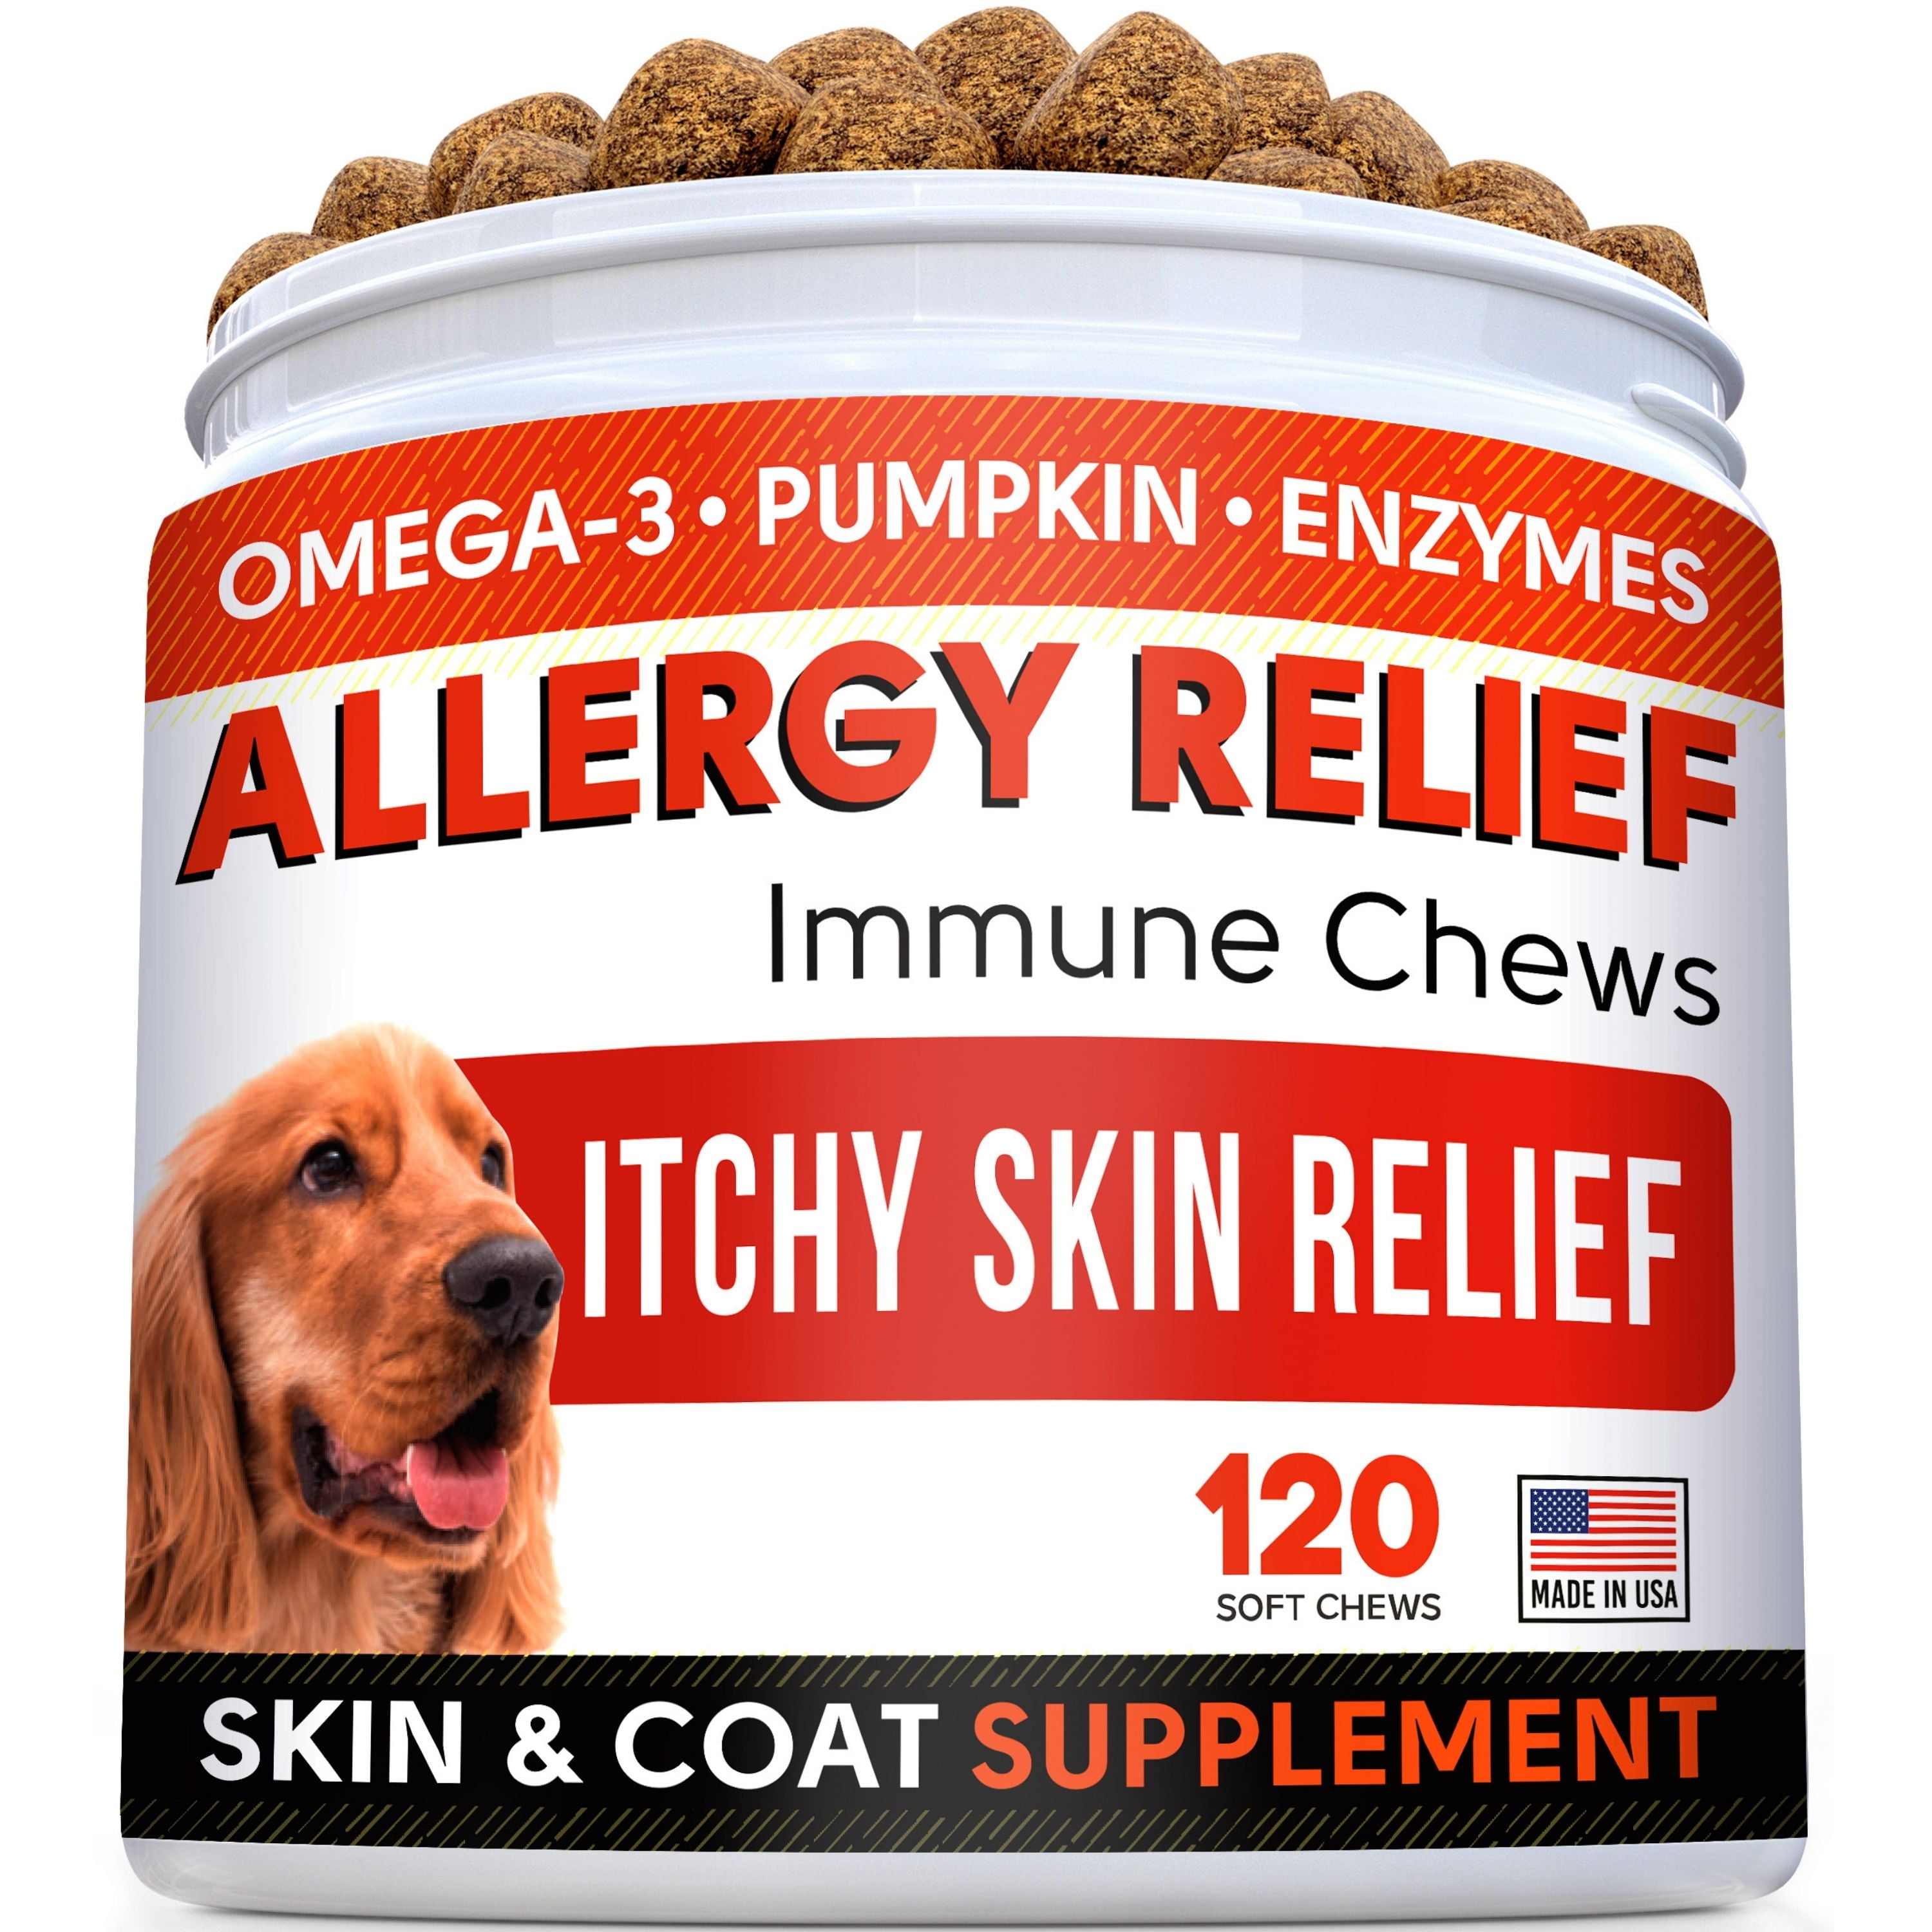 Dog supplements for skin allergies